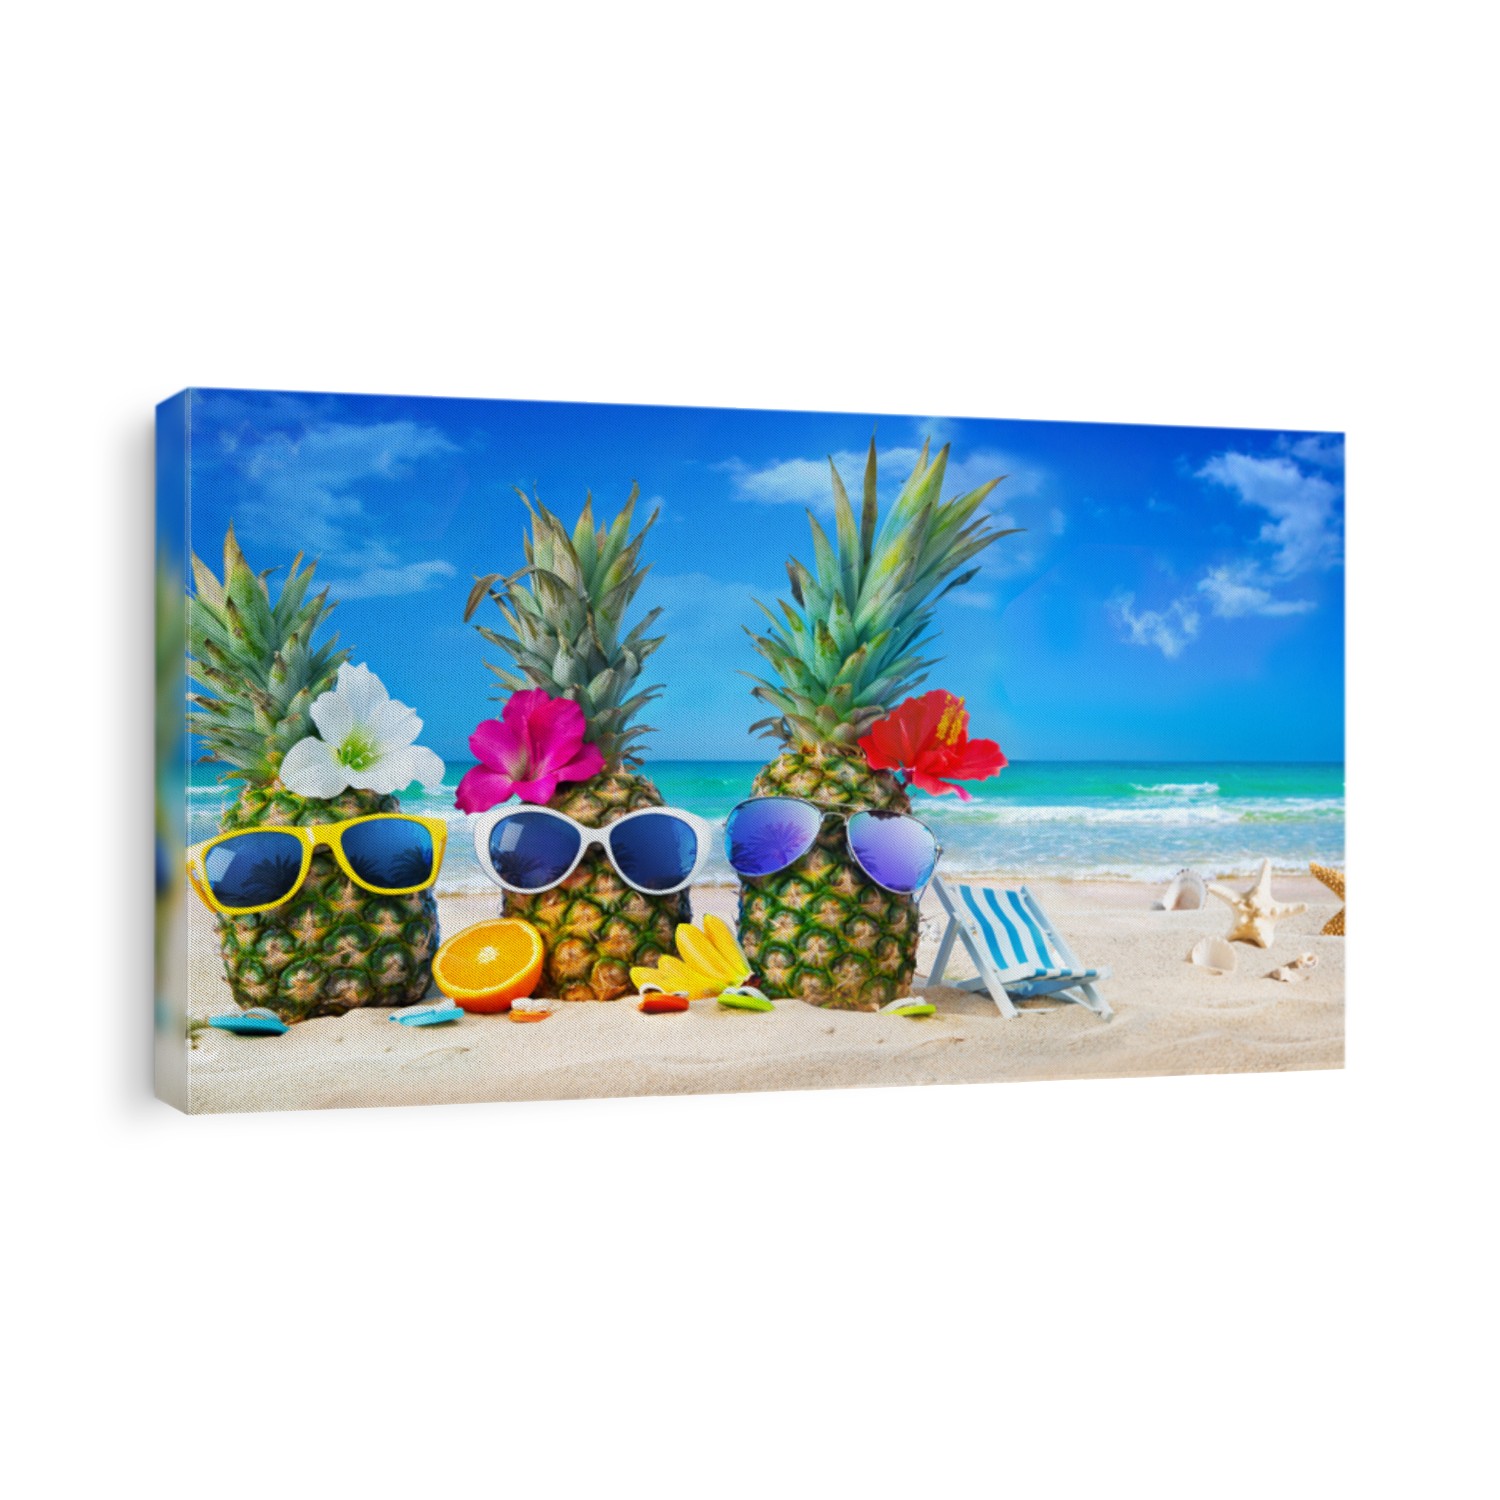 Attractive pineapples in stylish sunglasses on the sand beach against turquoise sea. Tropical summer vacation concept